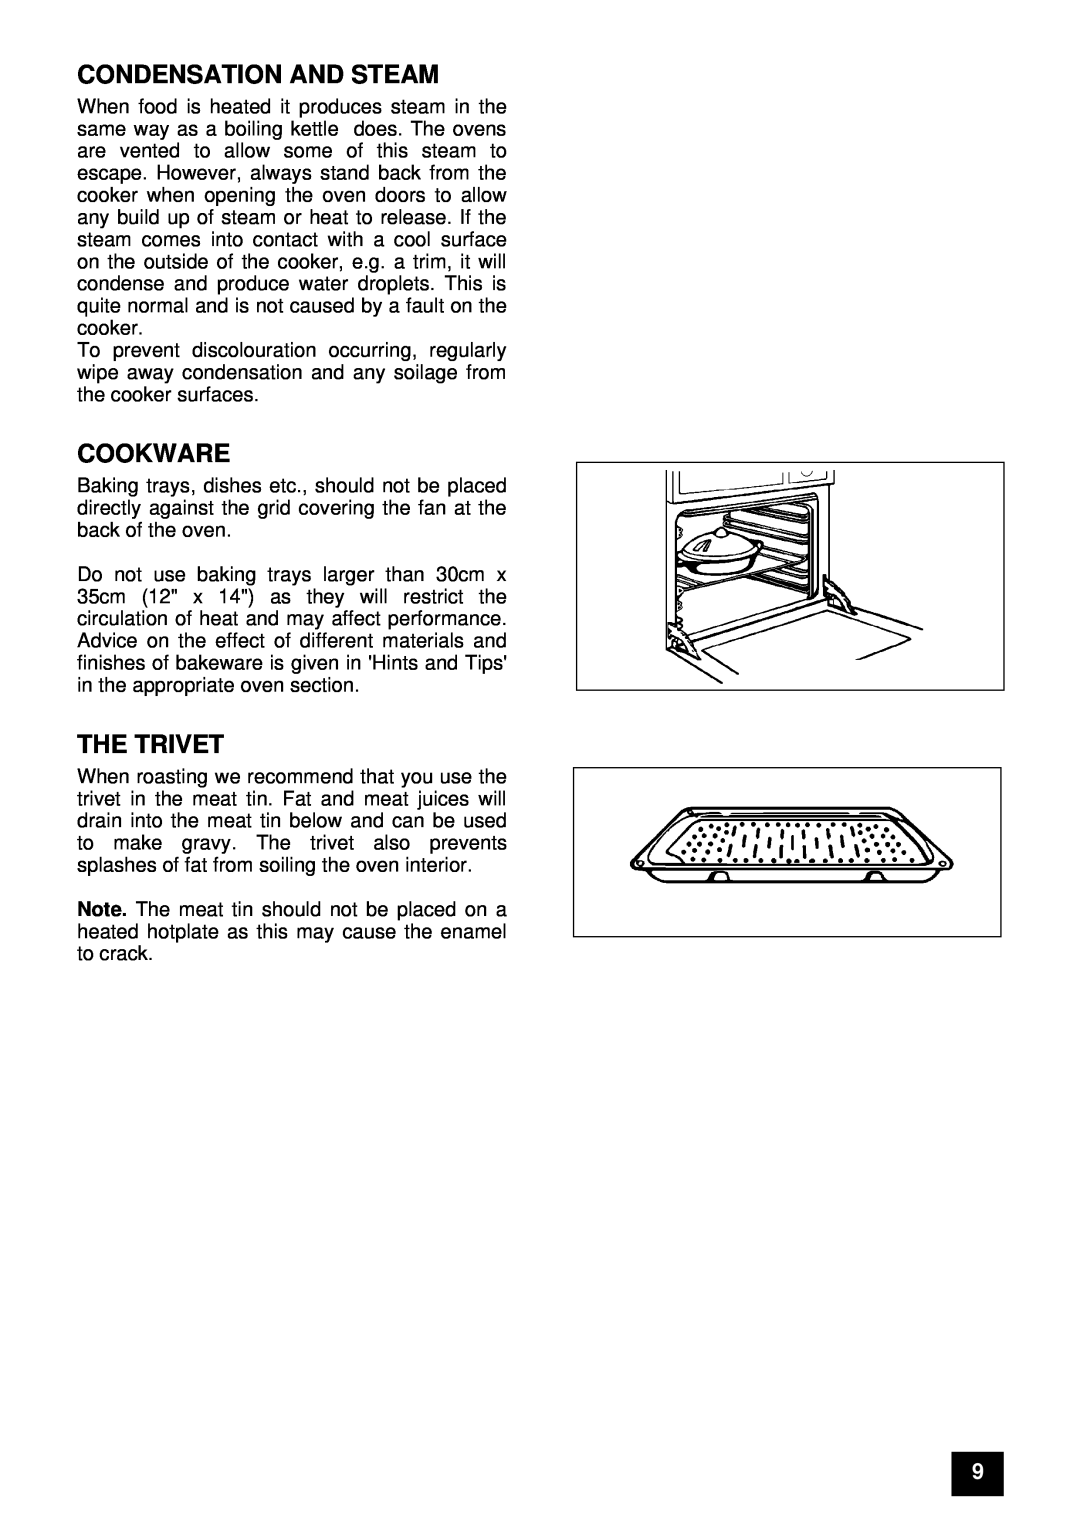 Tricity Bendix E 750 installation instructions Condensation And Steam, Cookware, The Trivet 